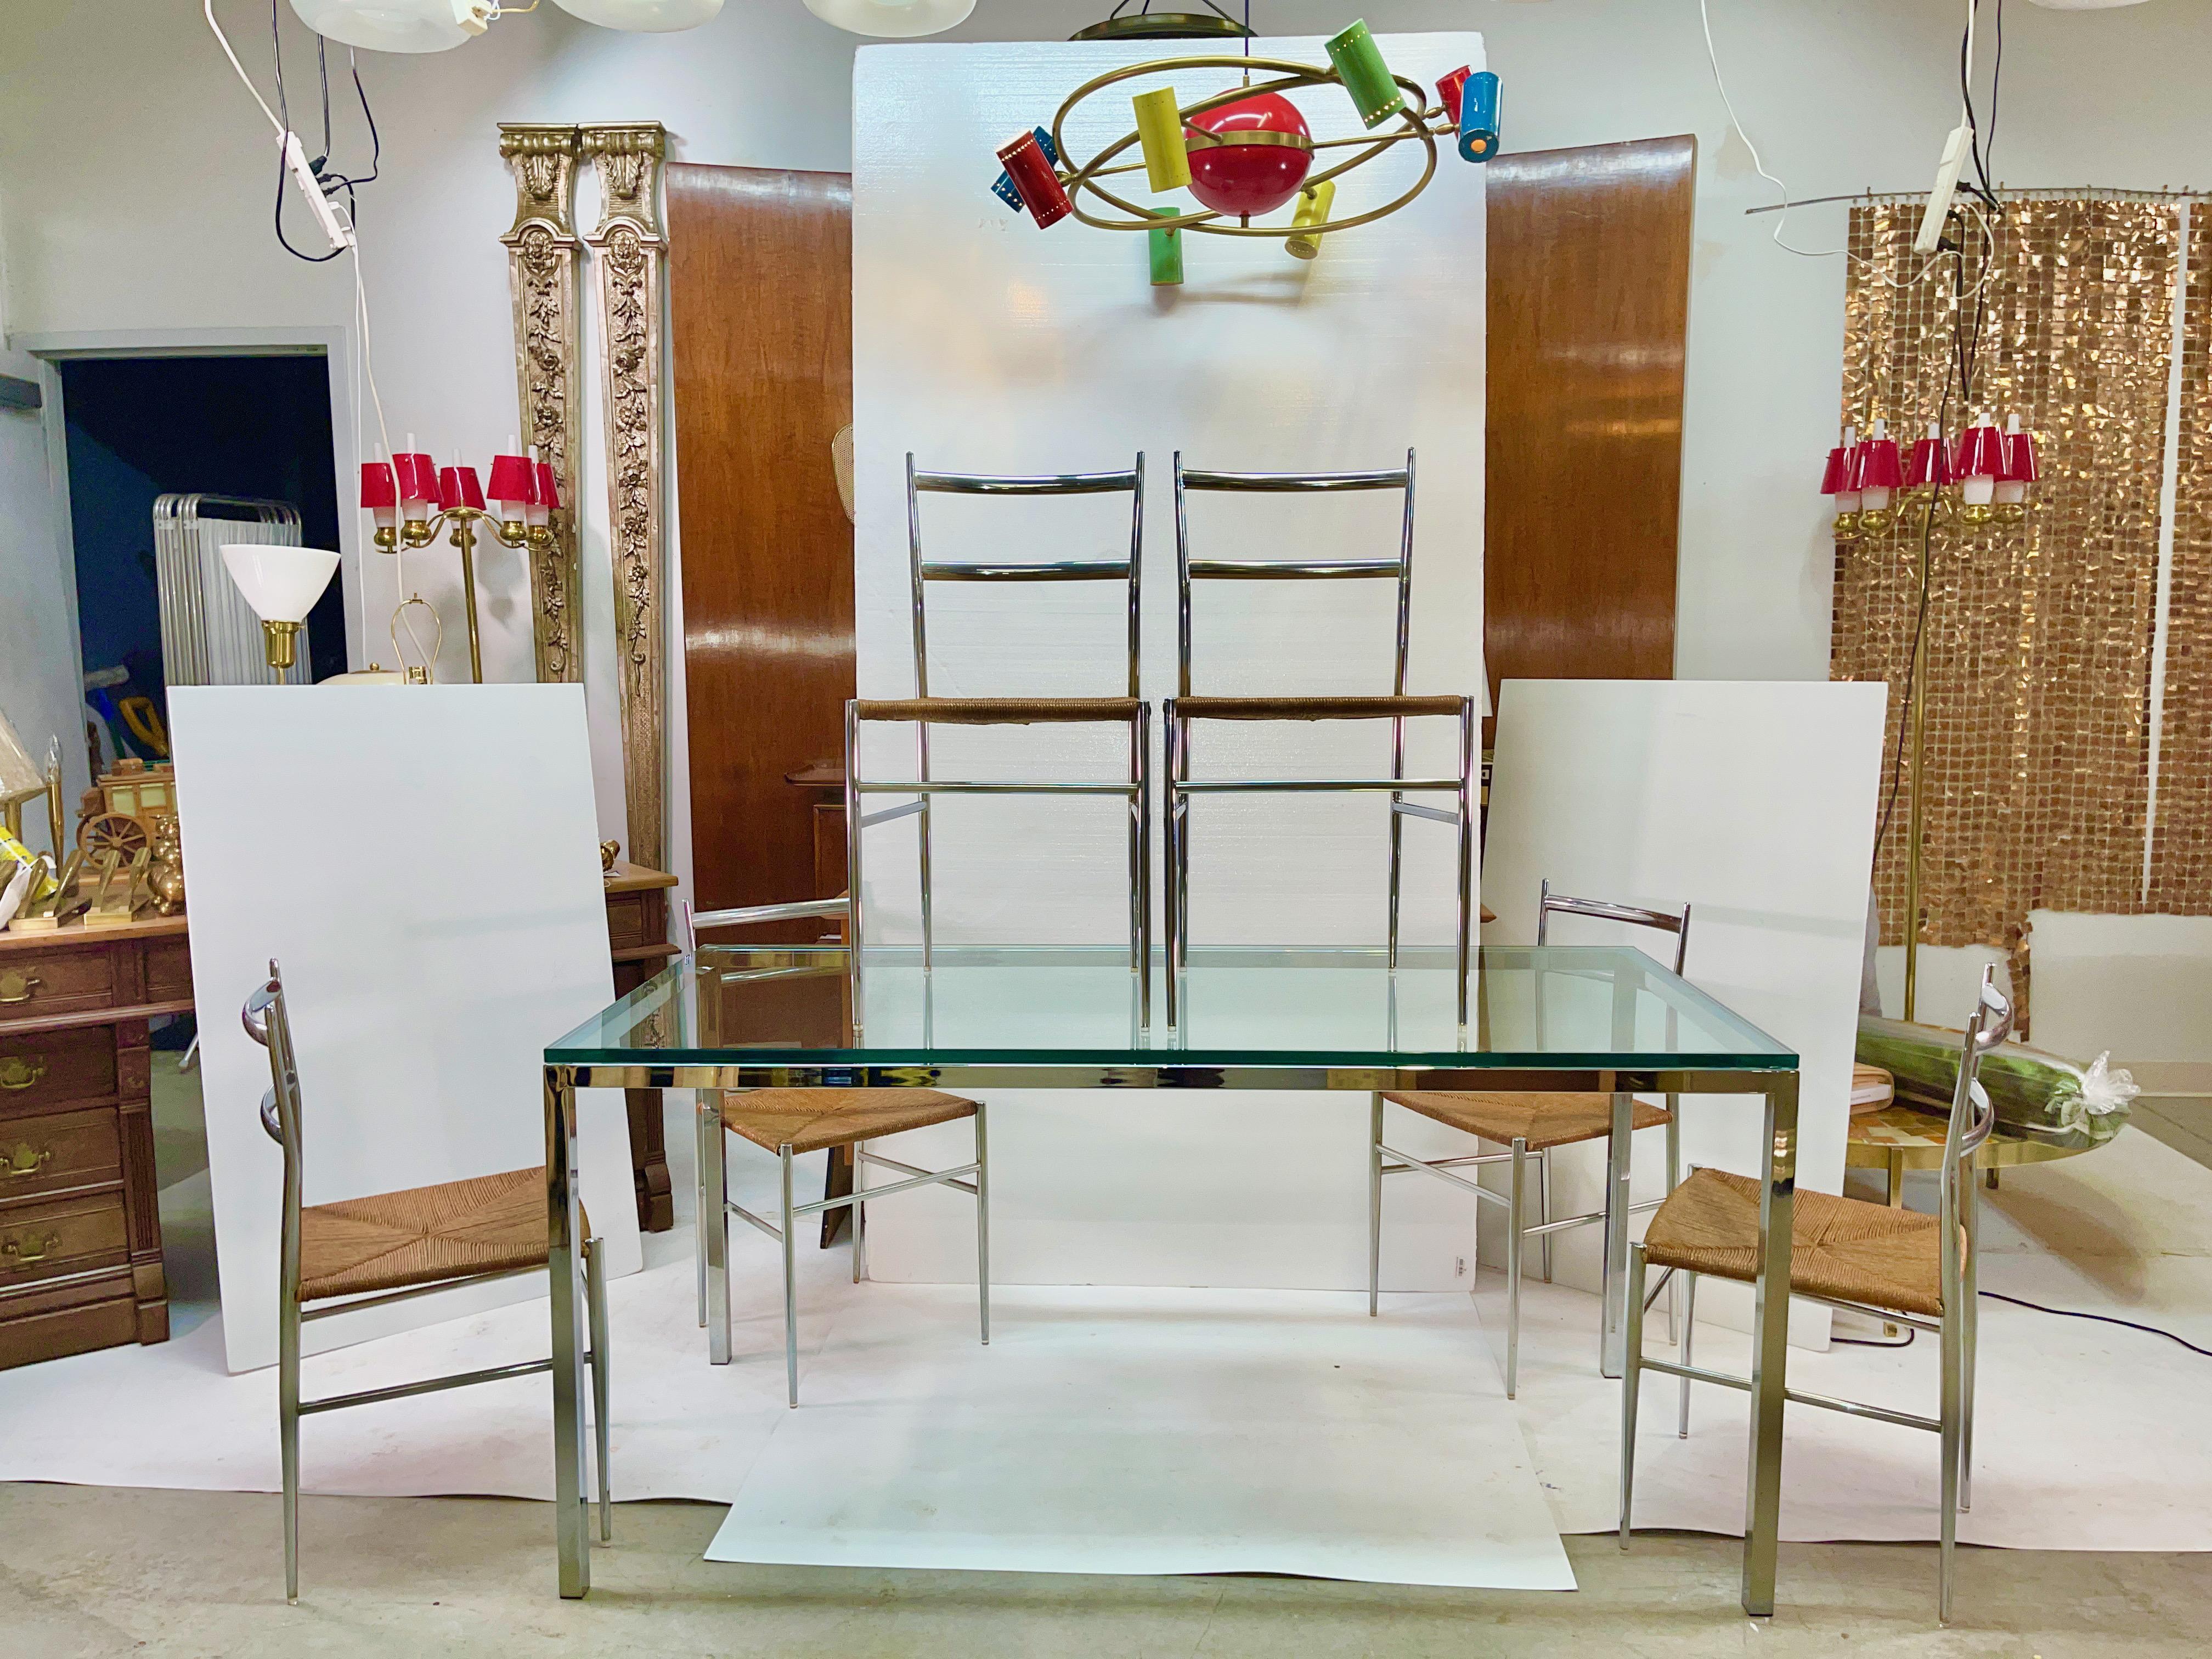 Late 20th Century Chrome & Glass Dining Table with 6 Chrome & Rope 'Superleggera' Chairs